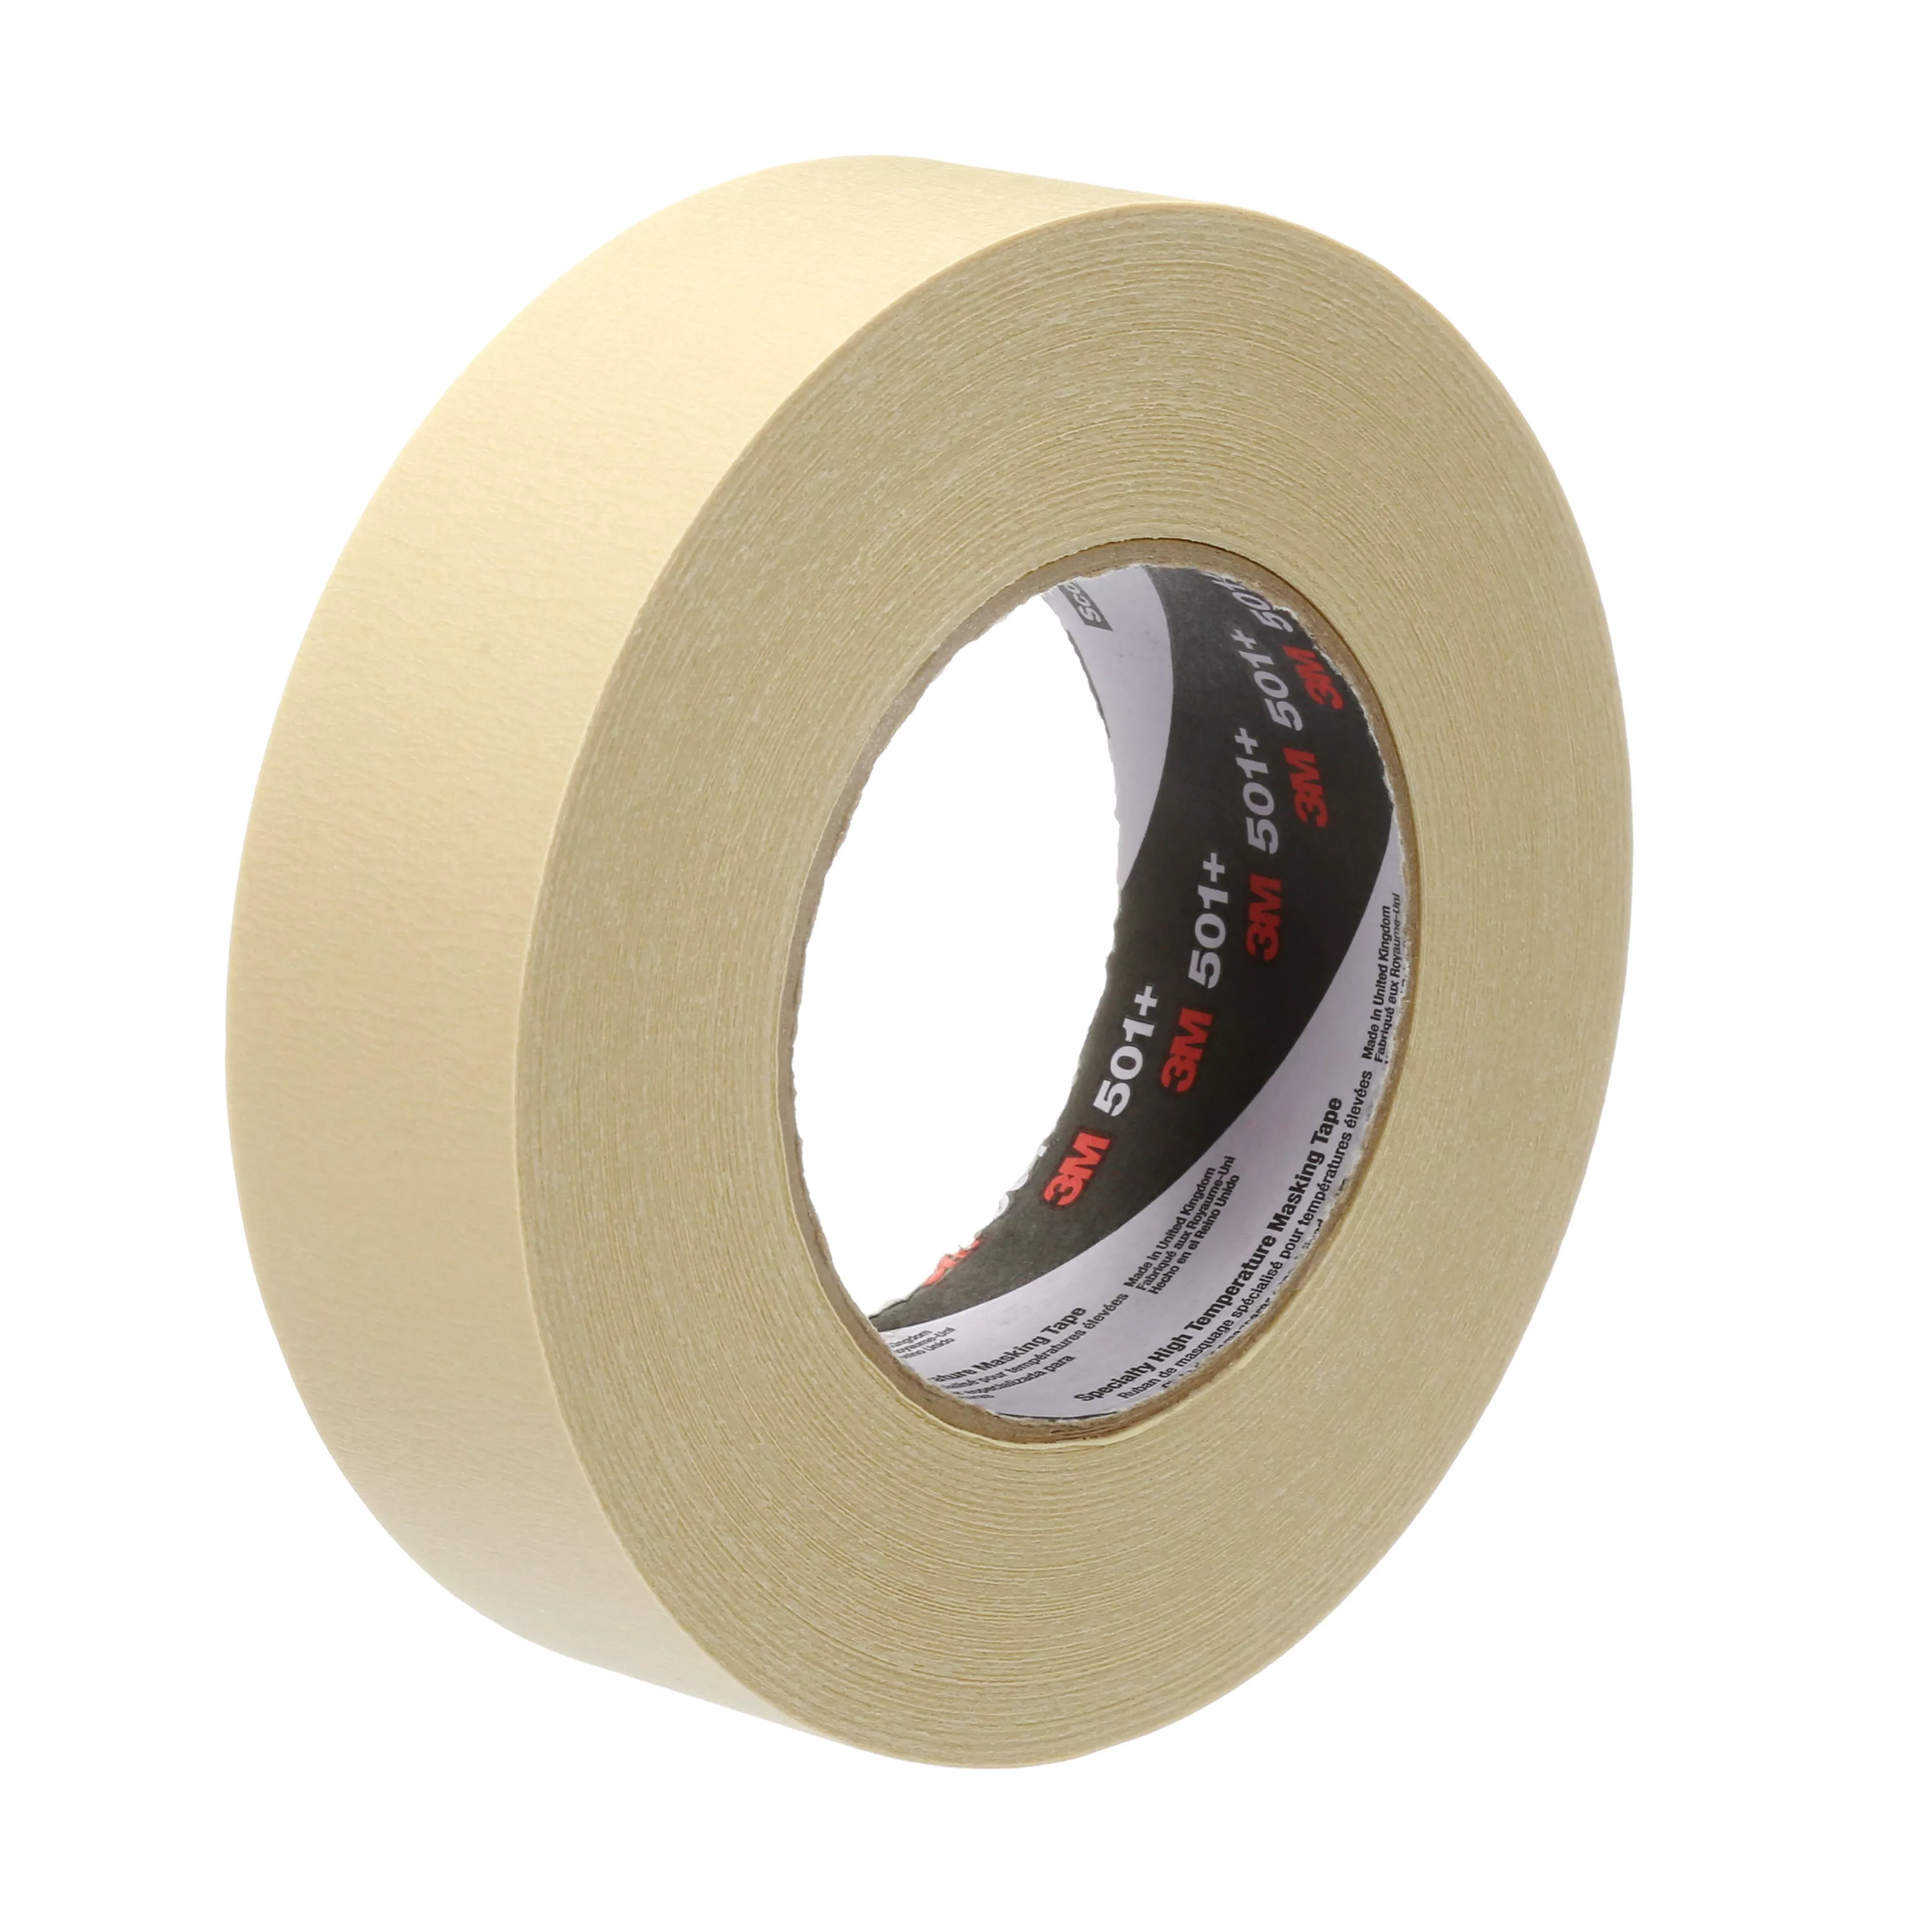 3M™ Specialty High Temperature Masking Tape 501+, Tan, 36 mm x 55 m, 7.3
mil, 24 Rolls/Case